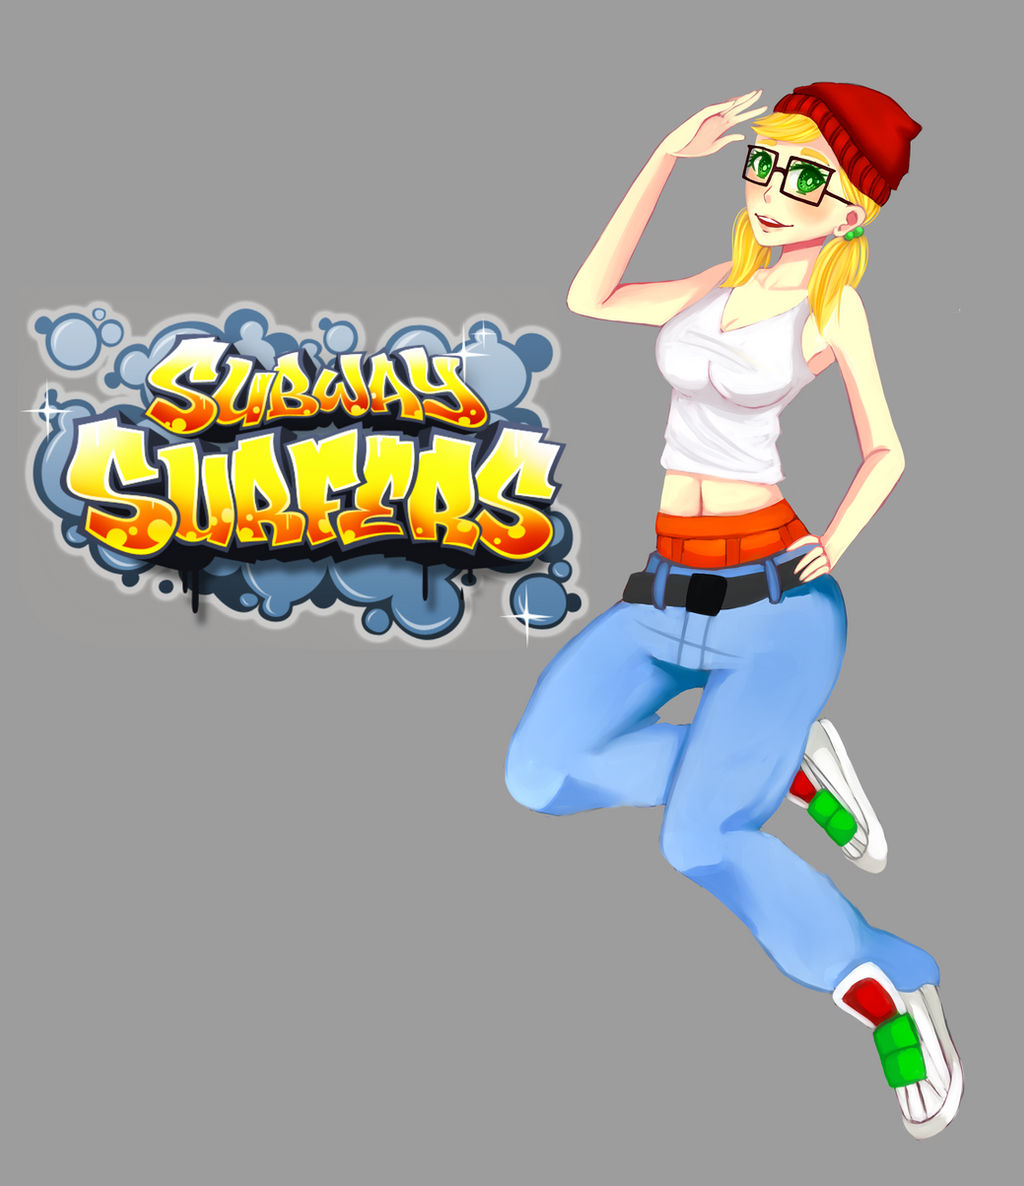 Tricky, Subway Surfers, wip 1 by tombraider4ever on DeviantArt